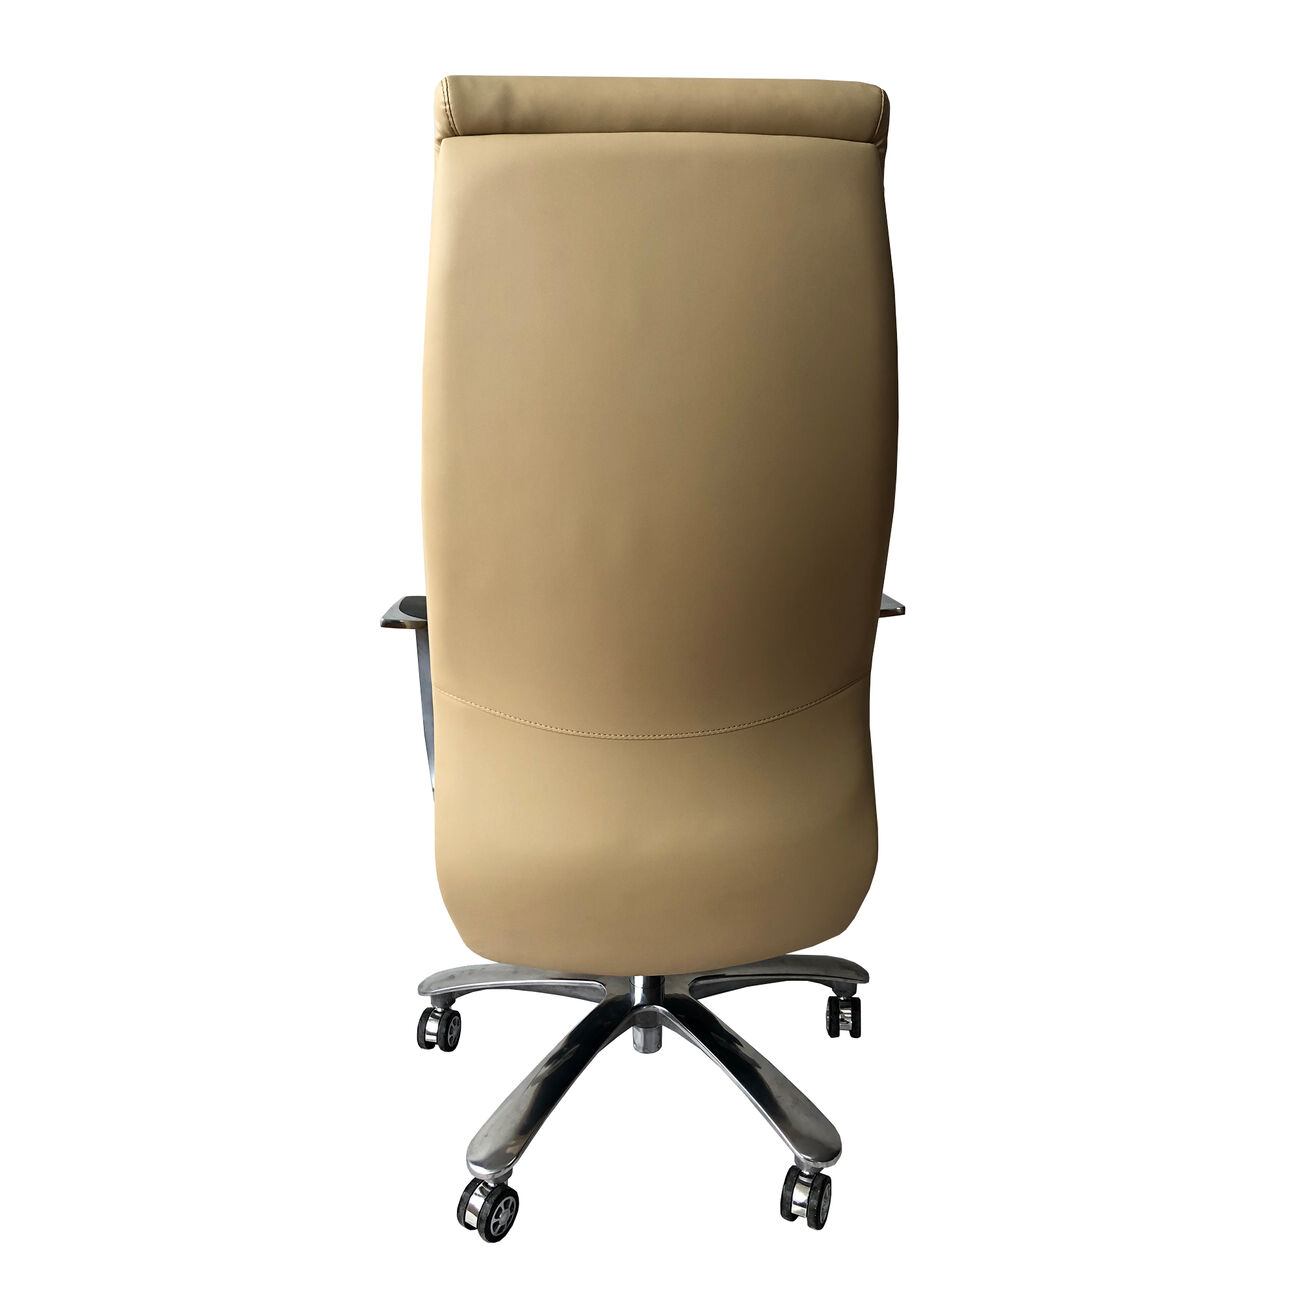 High Back Ergonomic Executive Leatherette Office Swivel Chair with Casters , Beige and Chrome